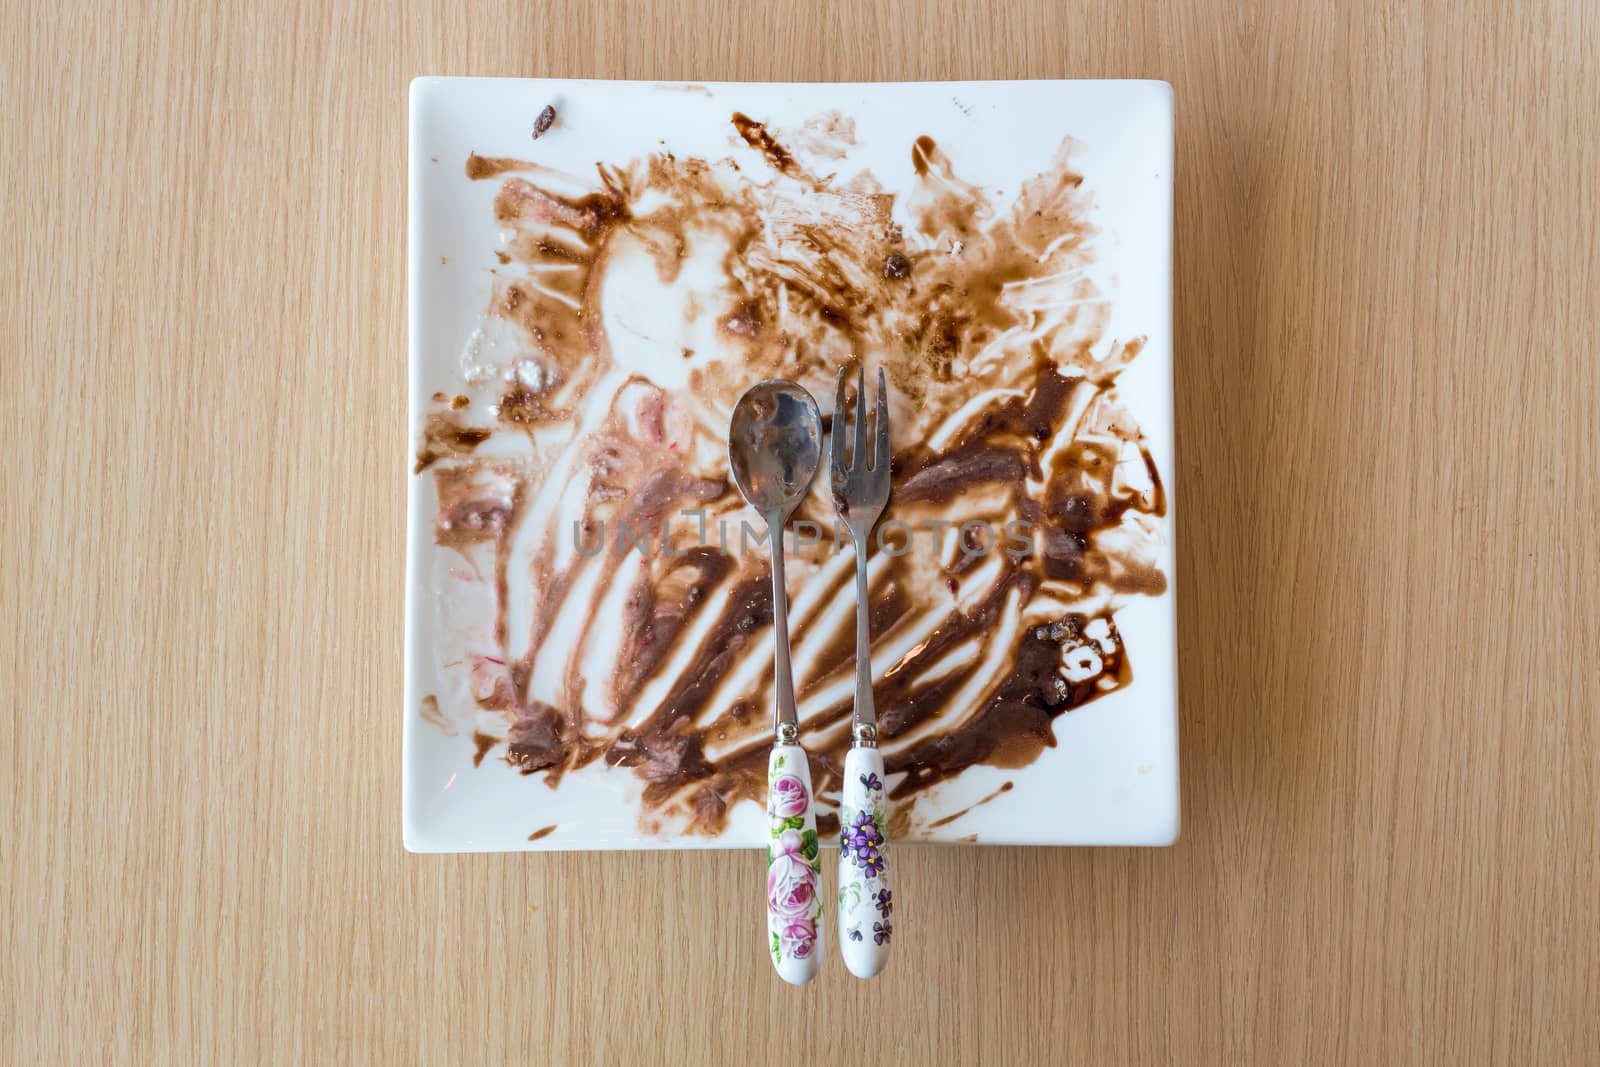 Leftovers of food on the white modern plate on wood background